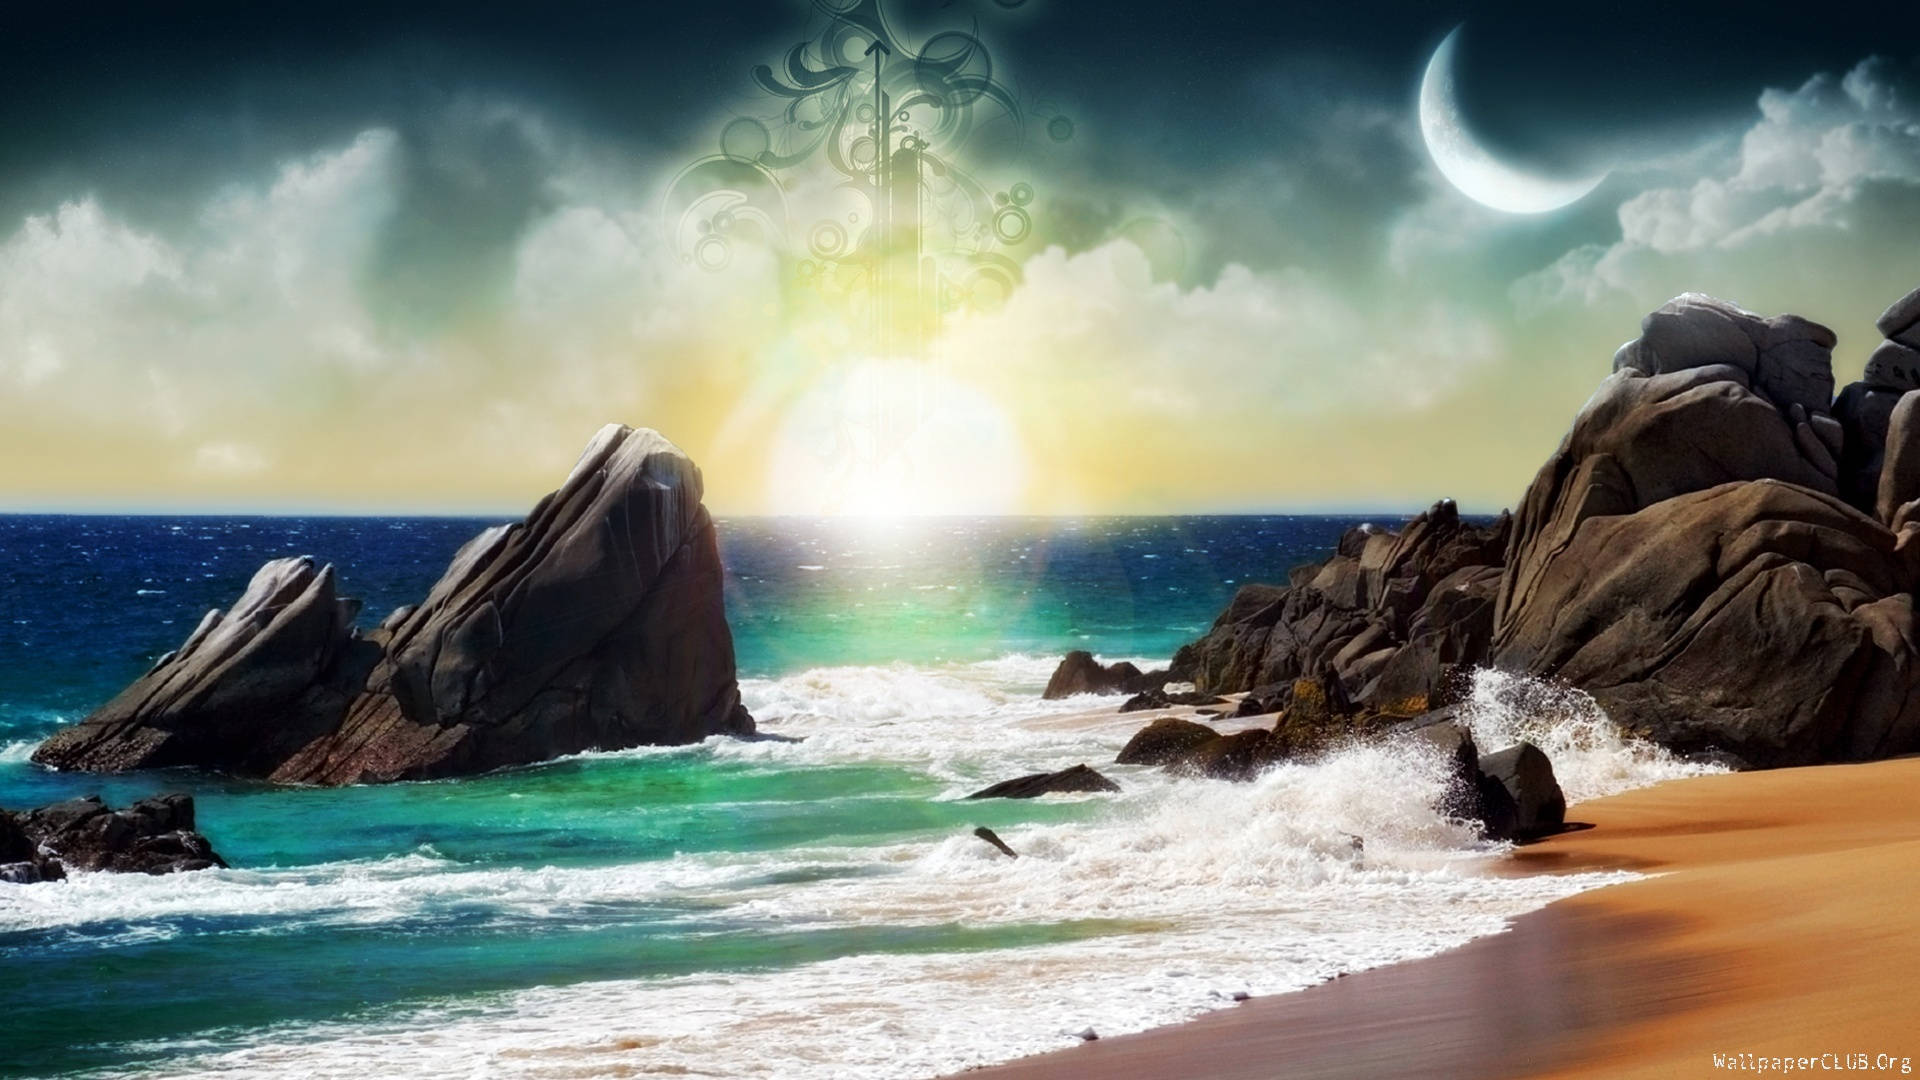 Fantasy Islands Shore With Waves Background